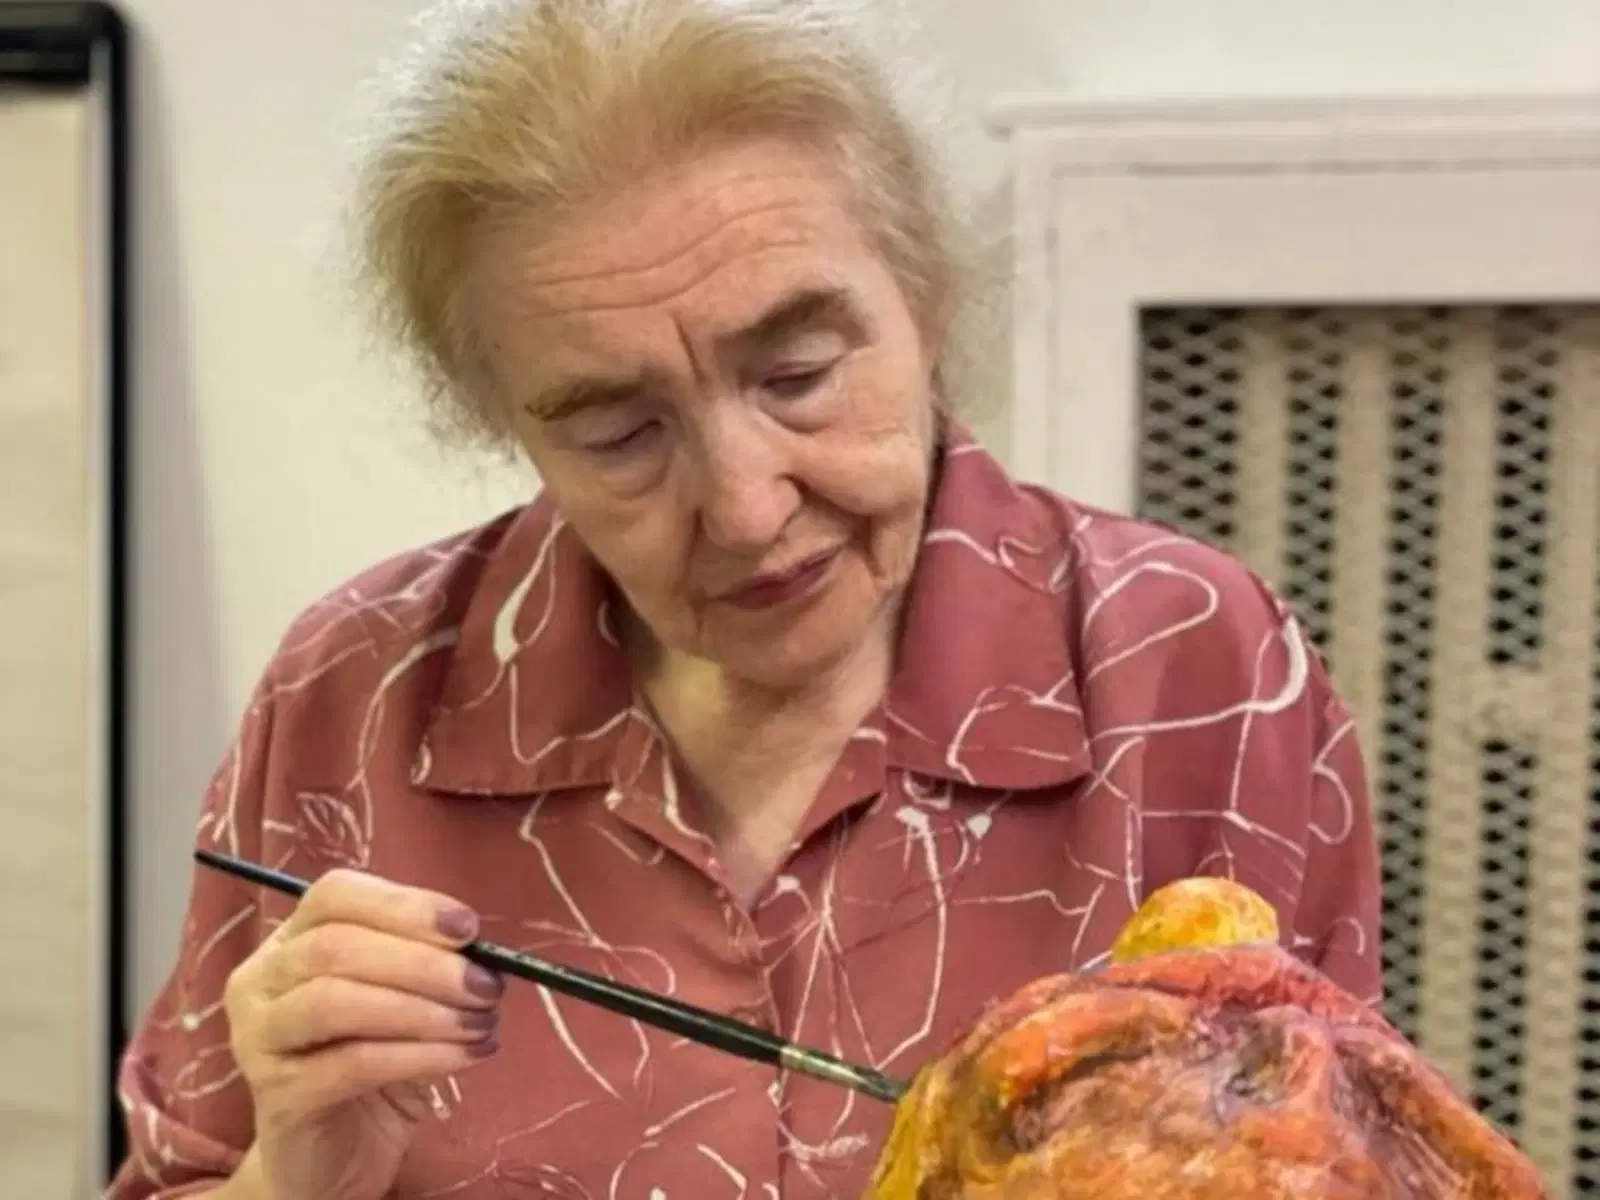 An elderly woman concentrates on painting, carefully applying brushstrokes to her artwork.